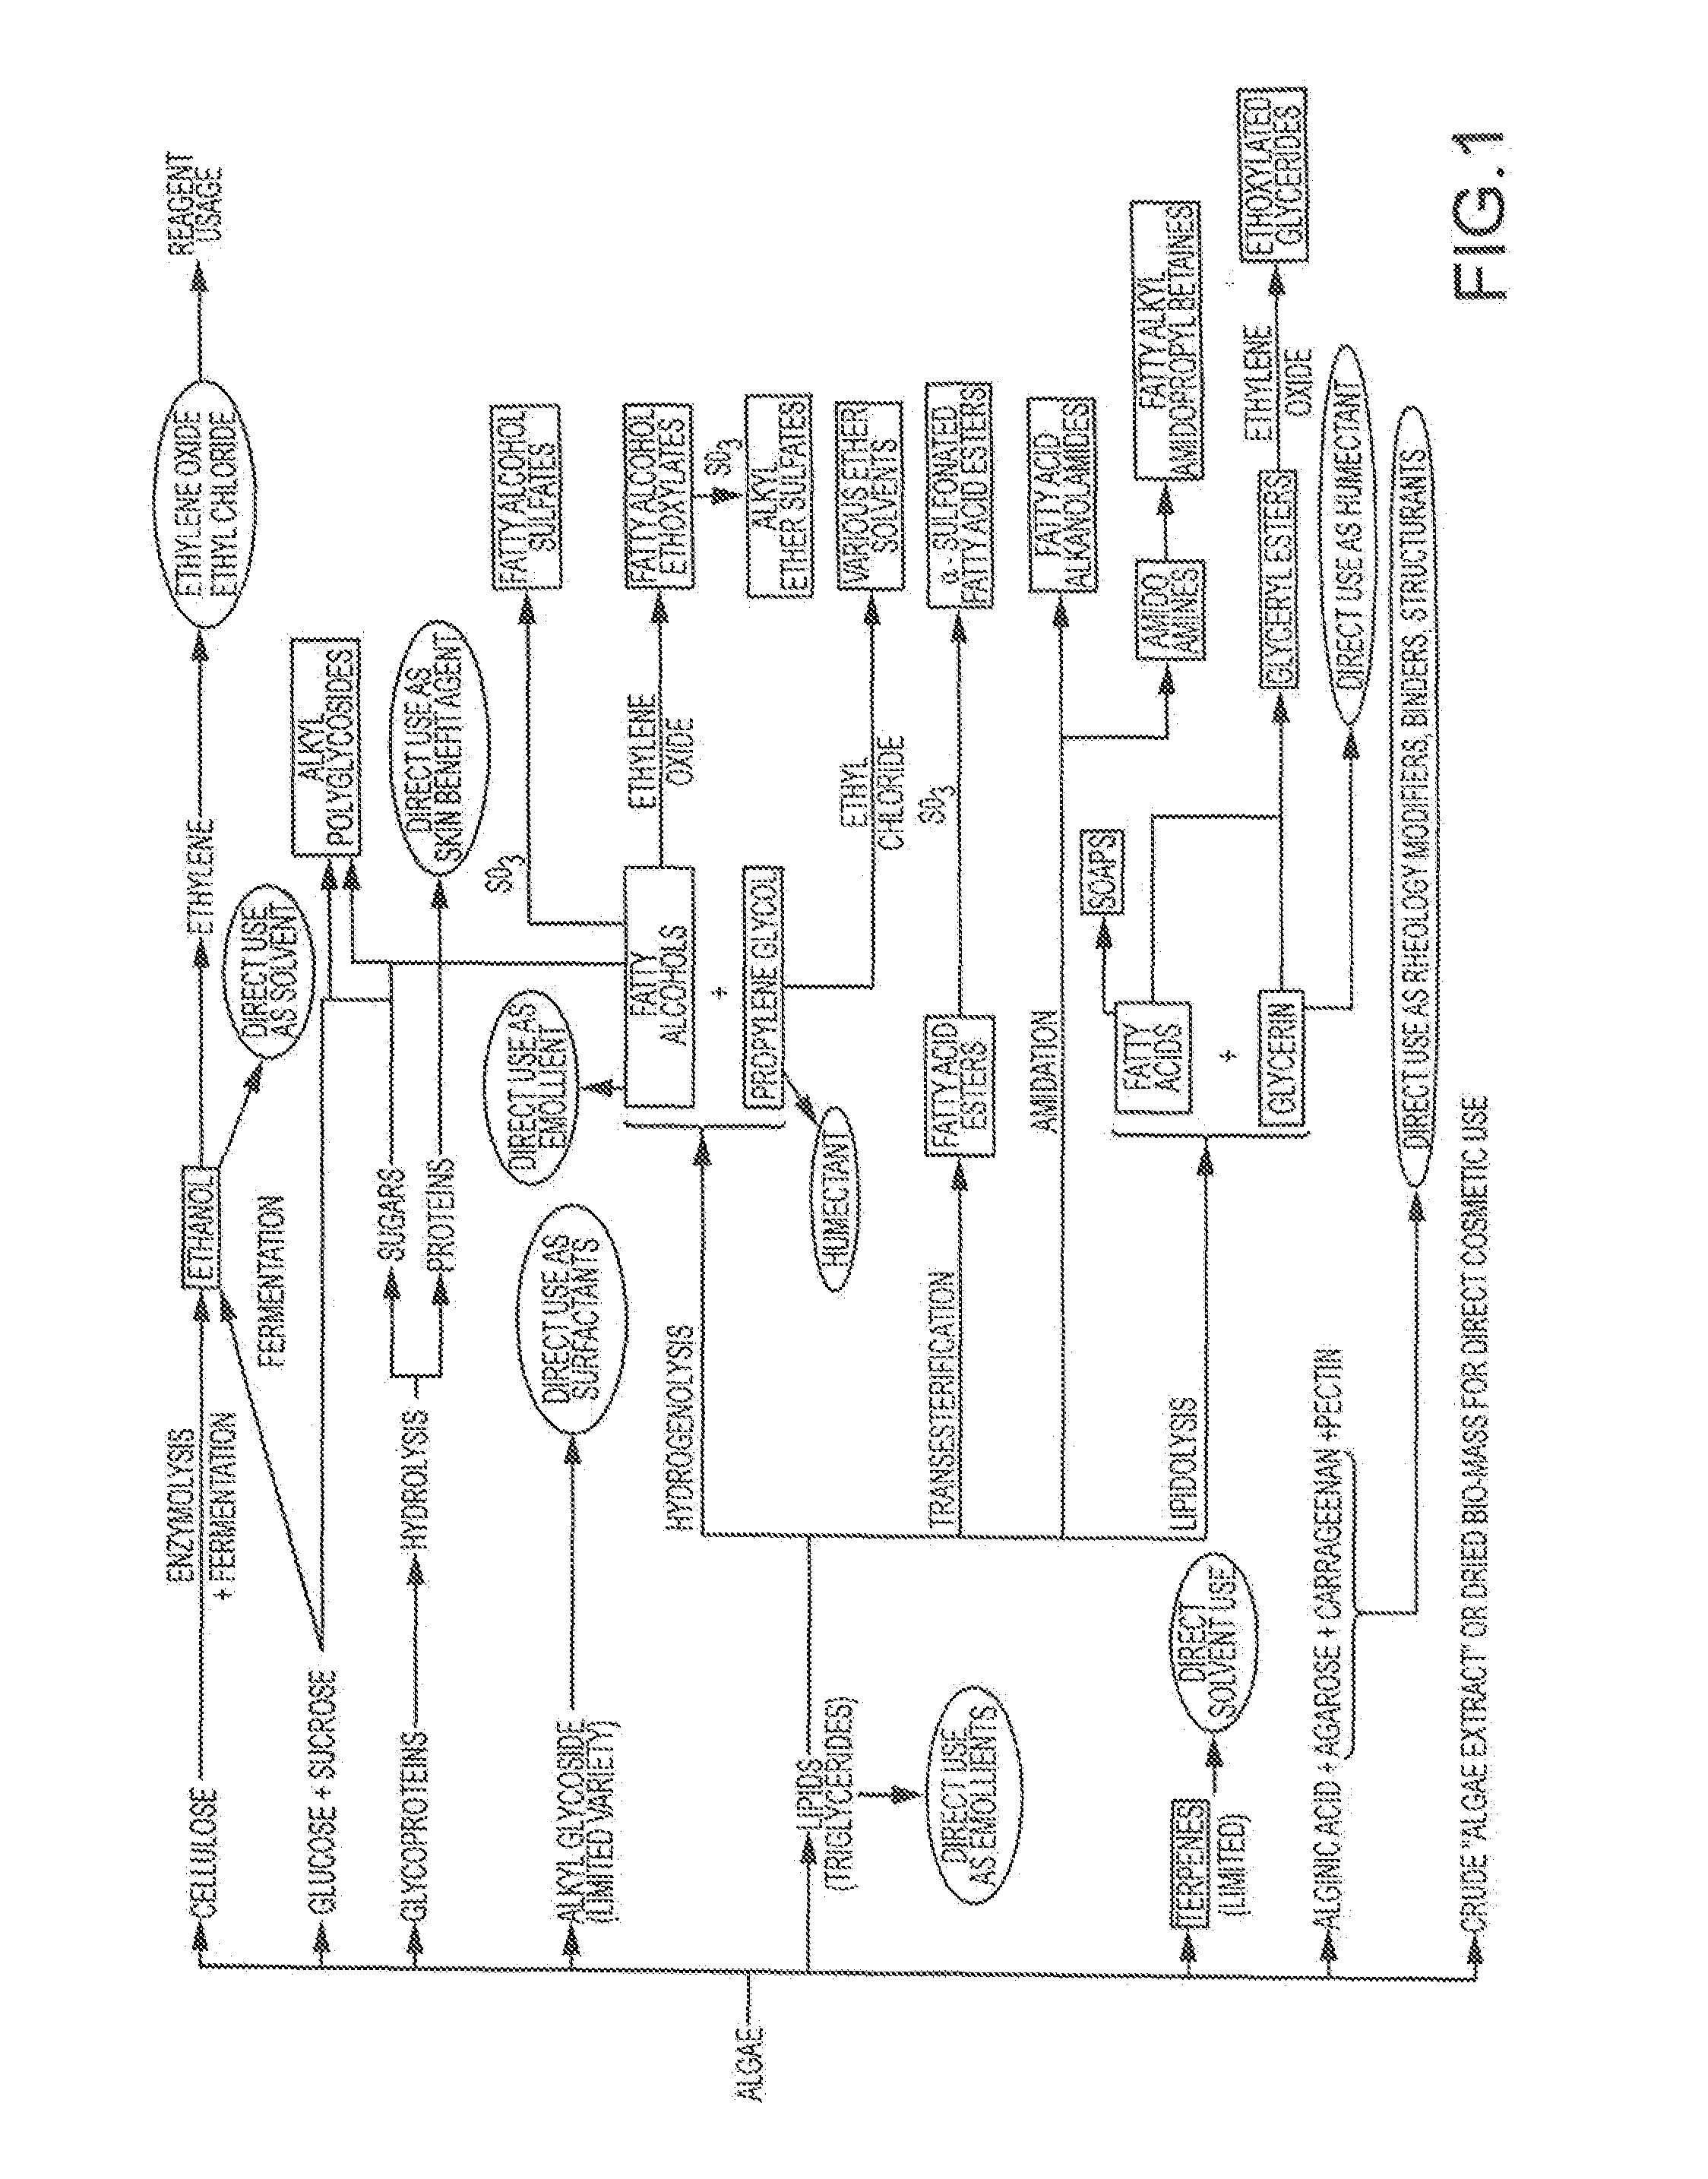 Consumer products comprising algae derived ingredients